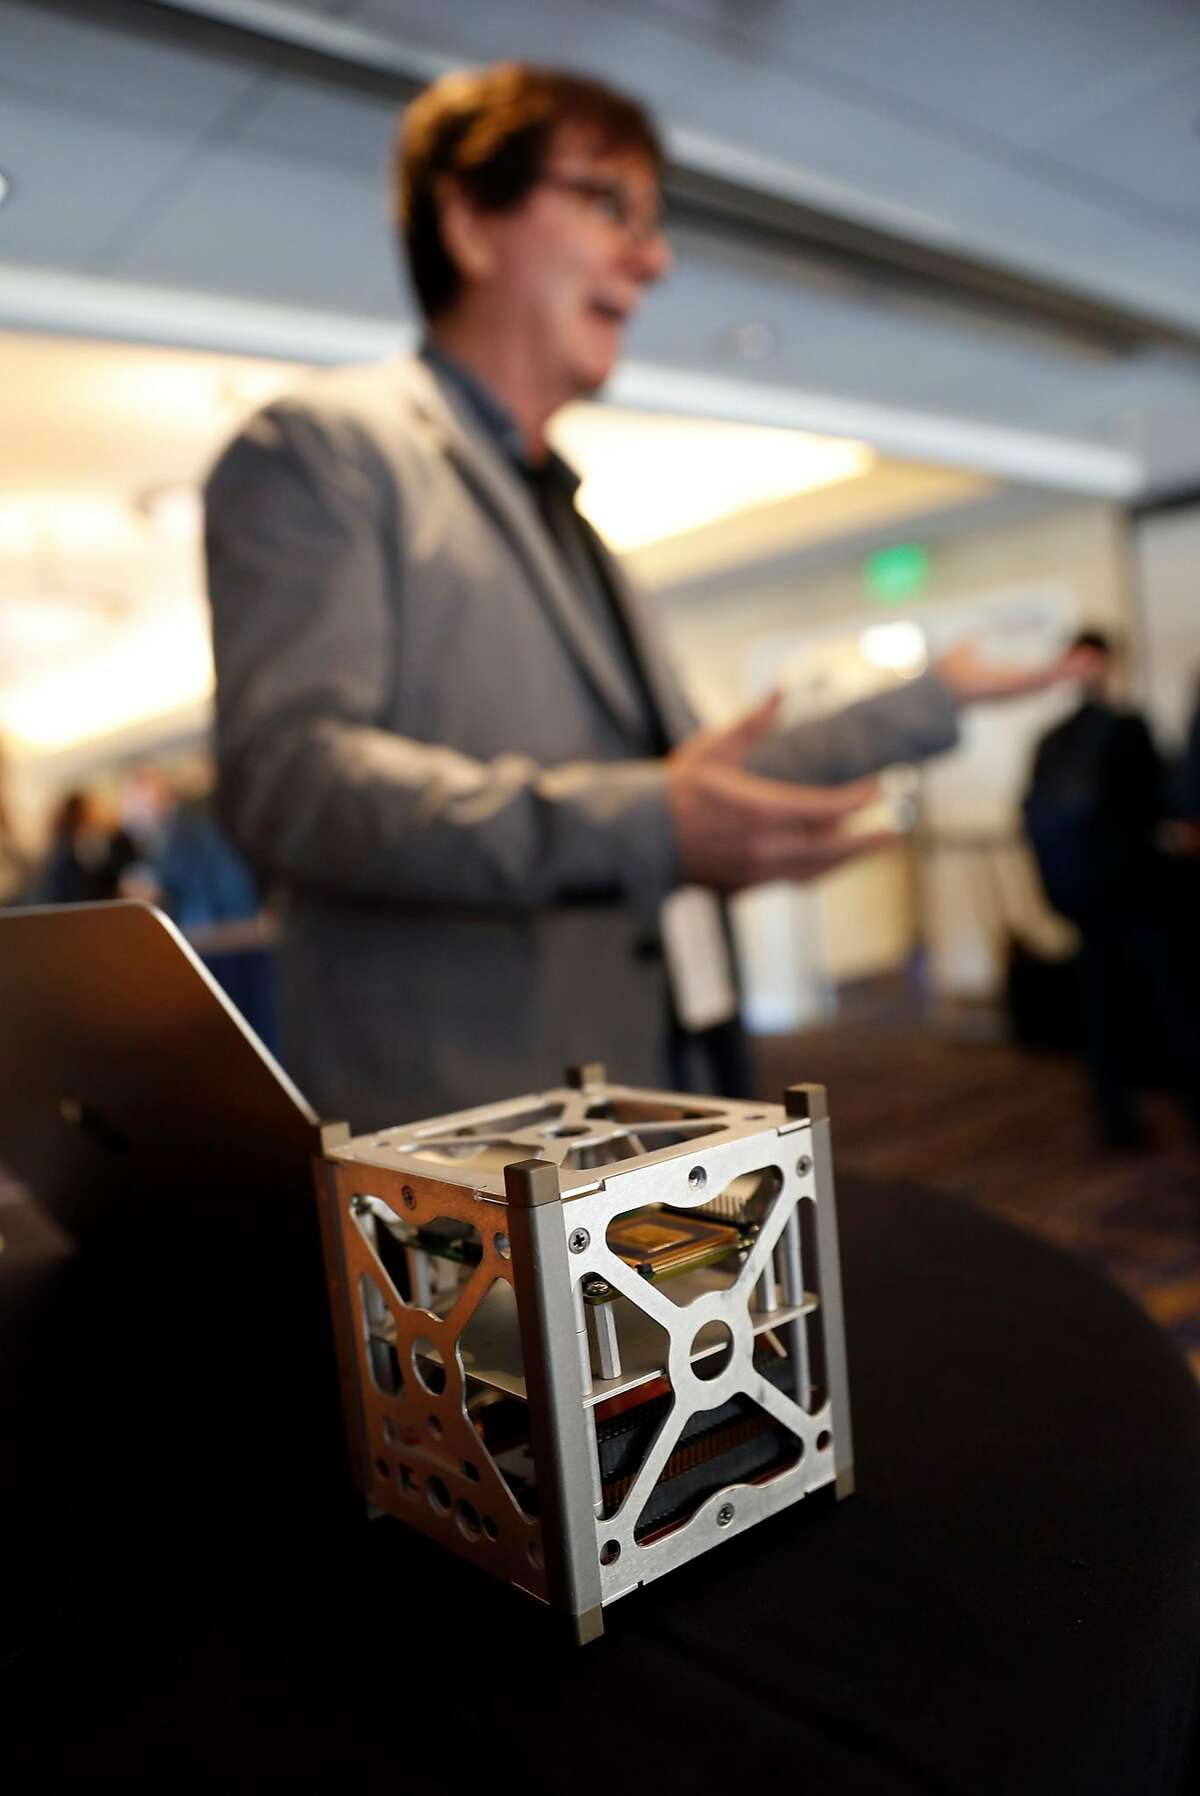 Vorago Technologies' Clark Senders discusses the company's cube satellite during Space Technology & Investment Forum Startup Showcase at JW Marriott Union Square in San Francisco, Calif. on Wednesday, August 30, 2017.